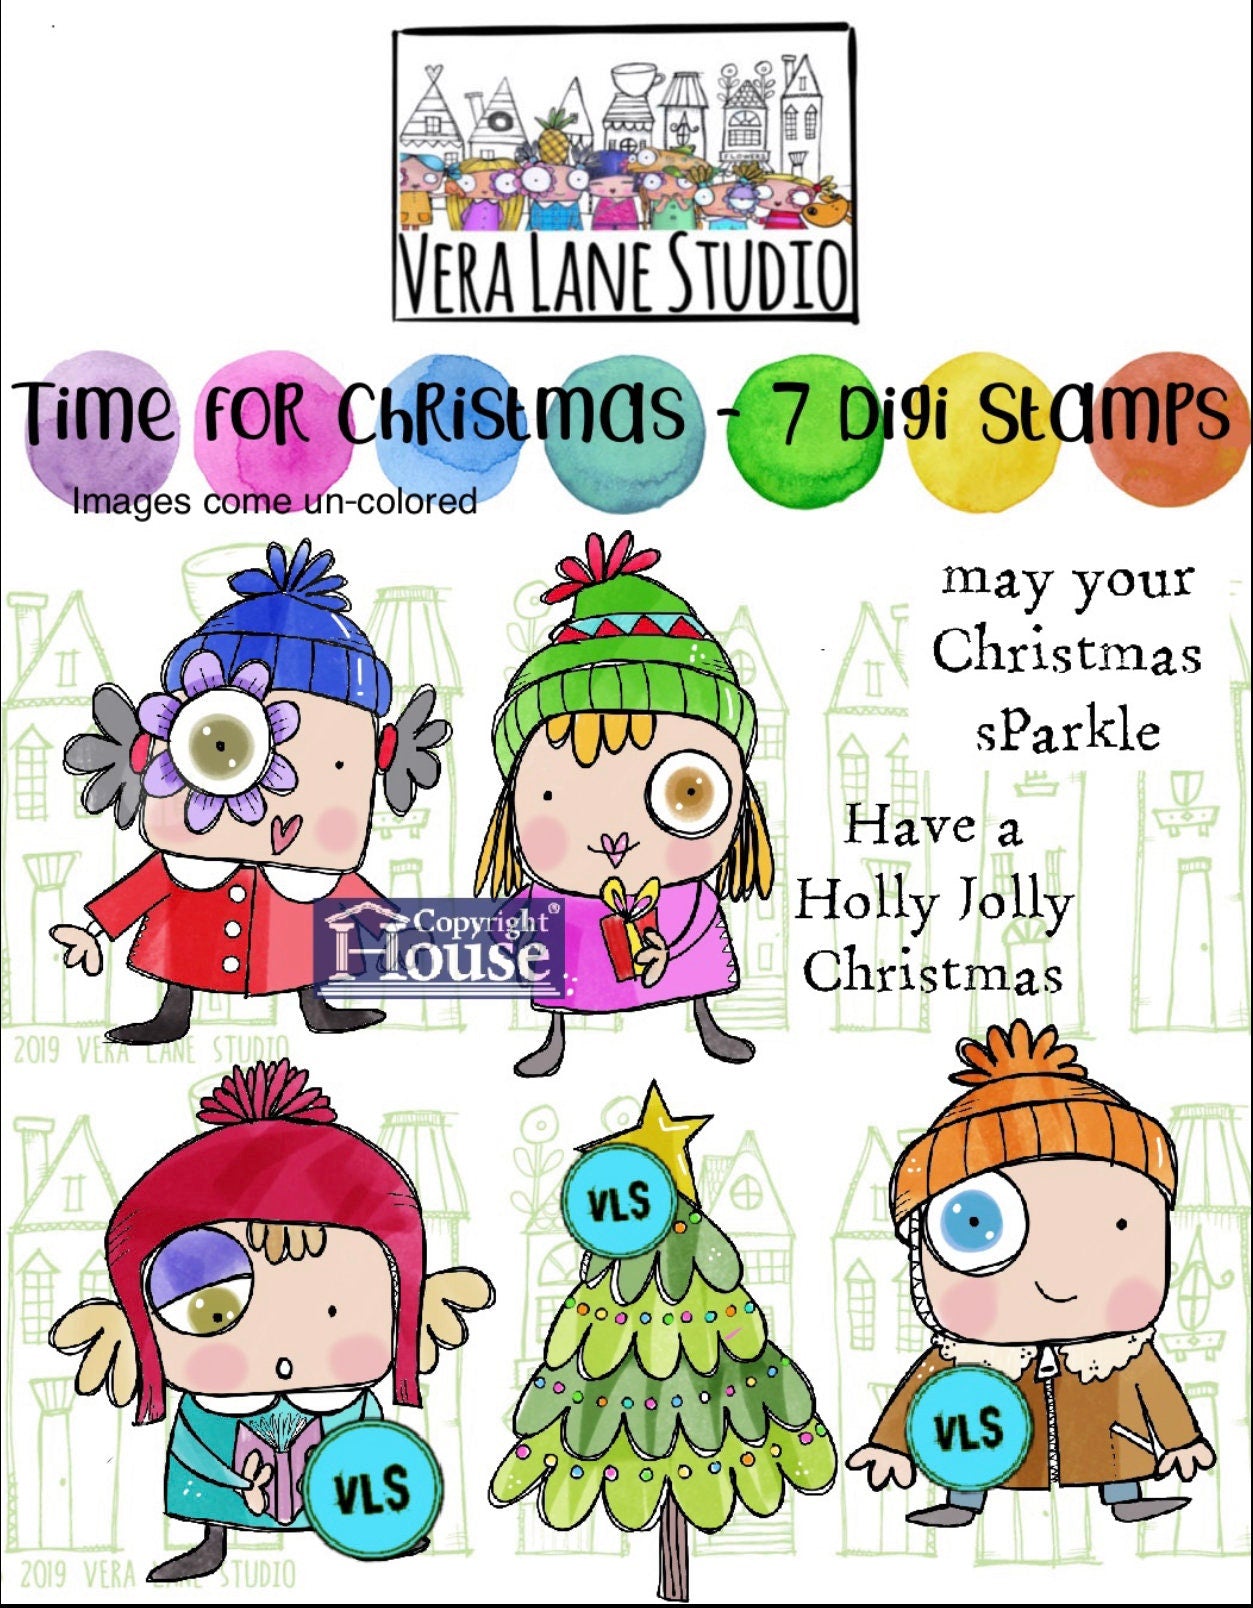 Time for Christmas - 7 Digi stamp bundle in PNG and JPG files